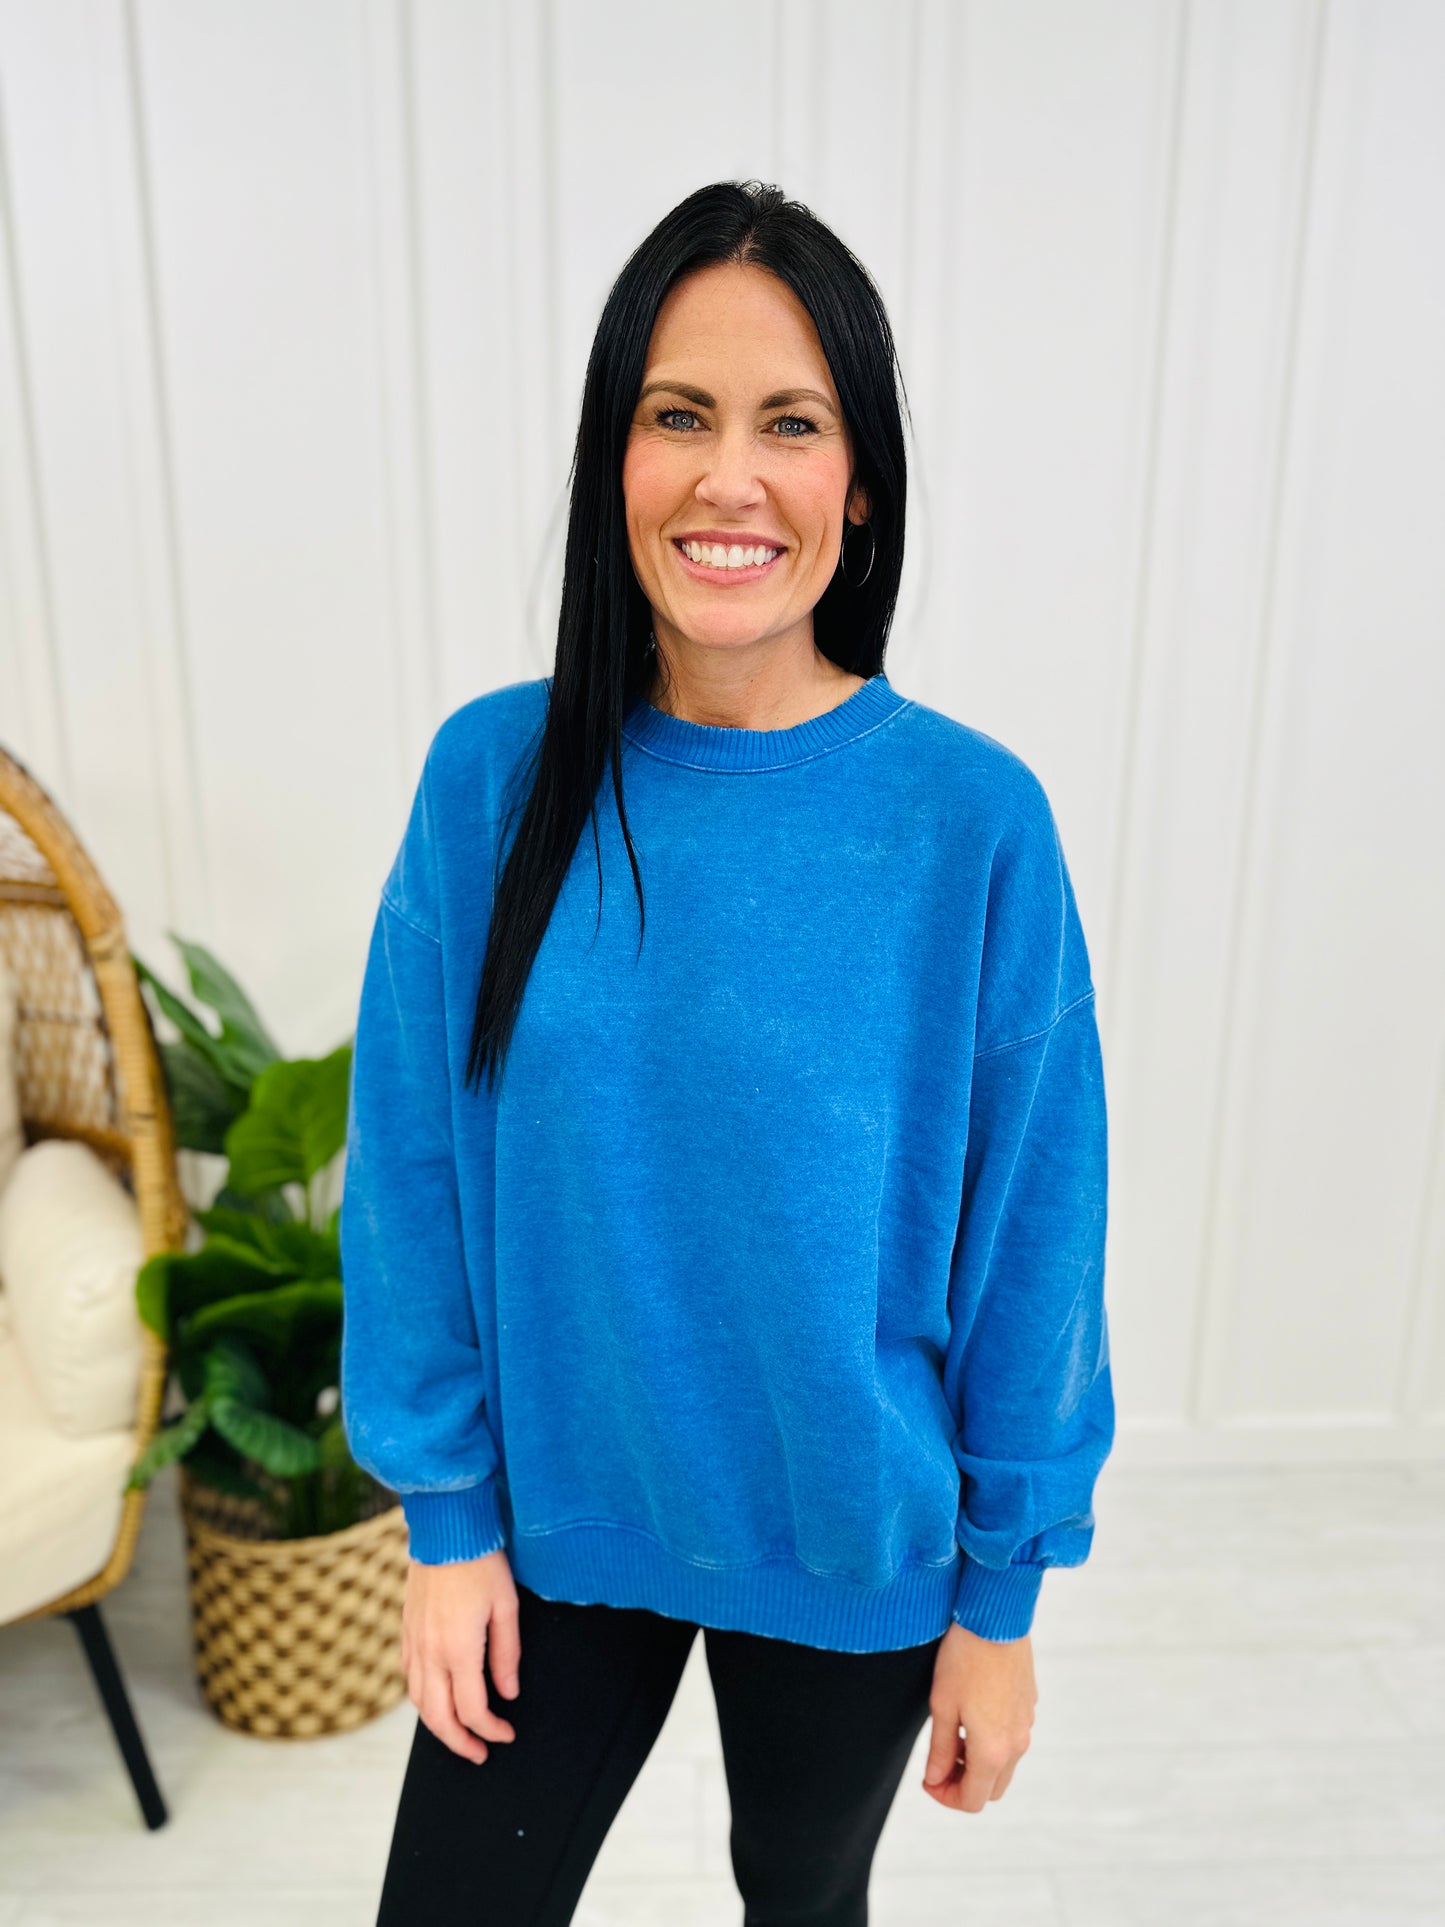 DOORBUSTER! On My Mind Pullover Top- Multiple Colors!